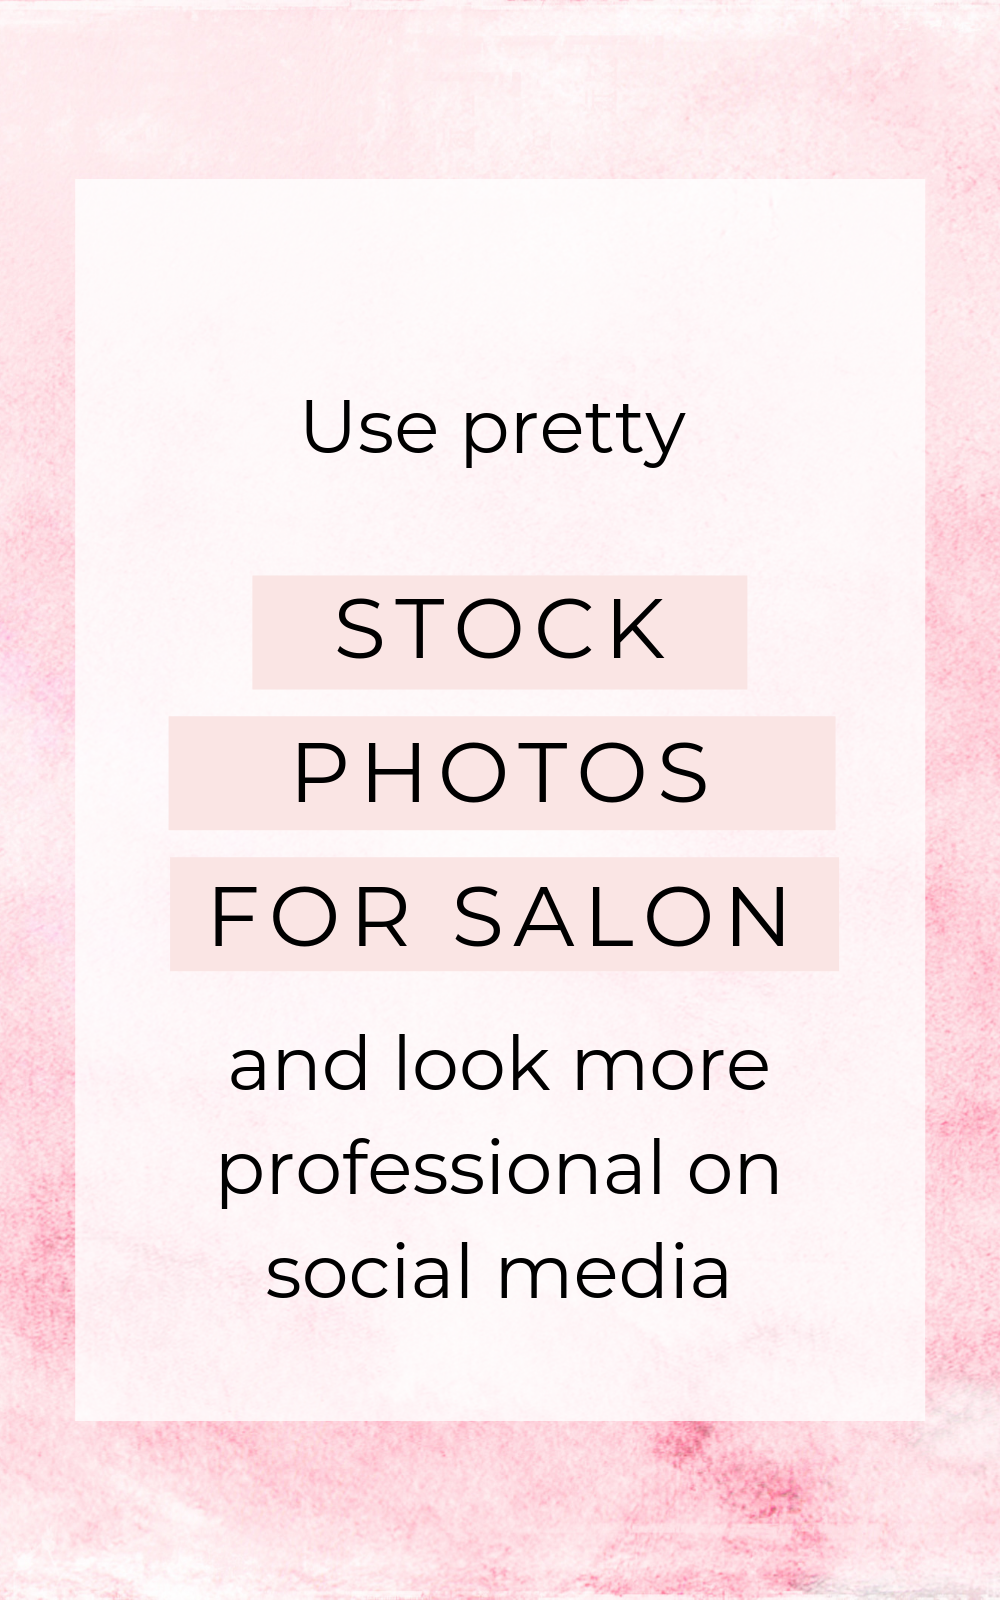 Where to find pretty, on-brand stock photos for your salon - Where to find pretty, on-brand stock photos for your salon -   15 madison beauty Bar ideas